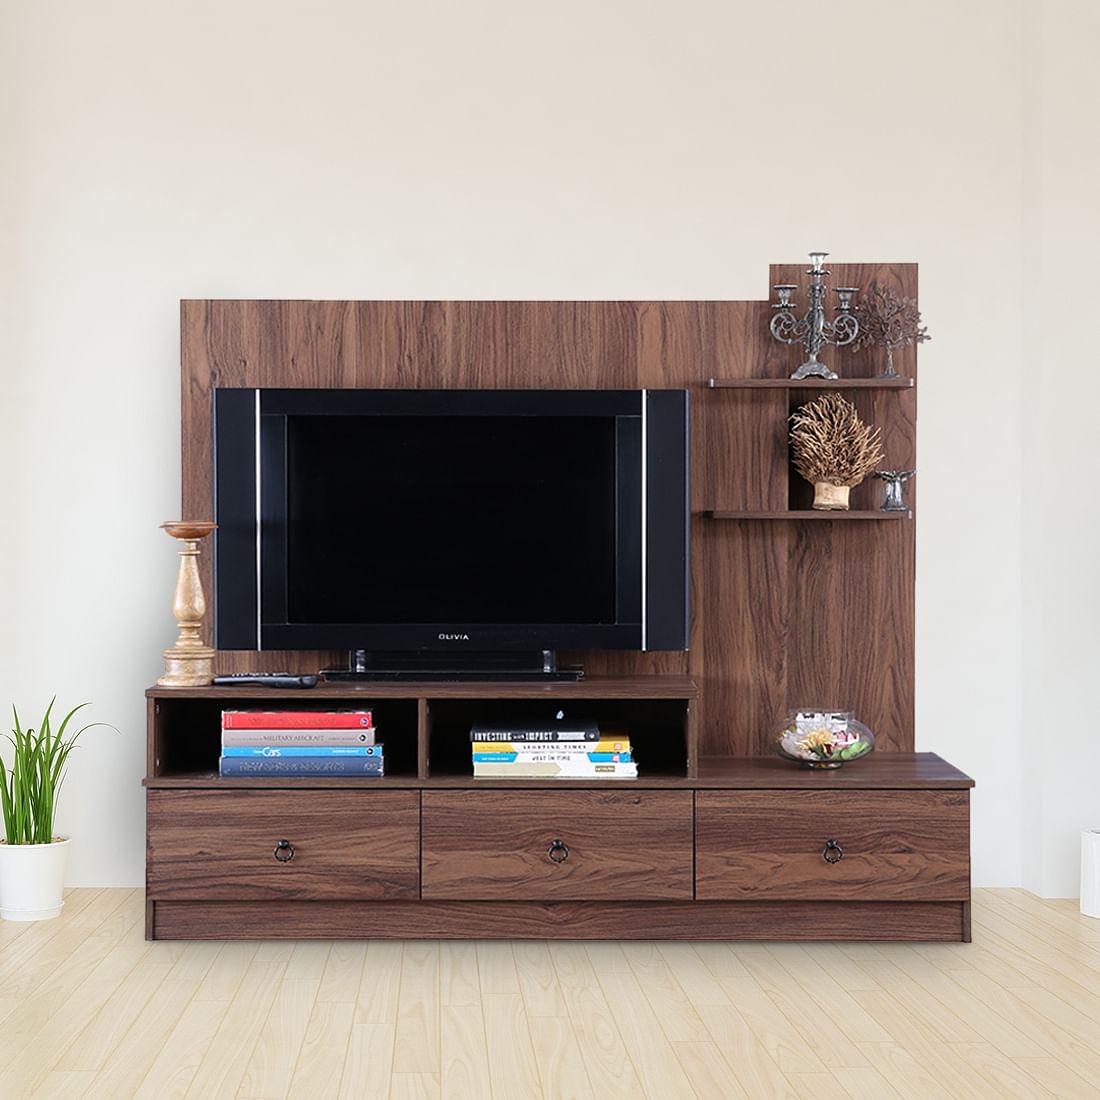 Buy Nicole Engineered Wood Wall Unit in Walnut Colour Online at ...